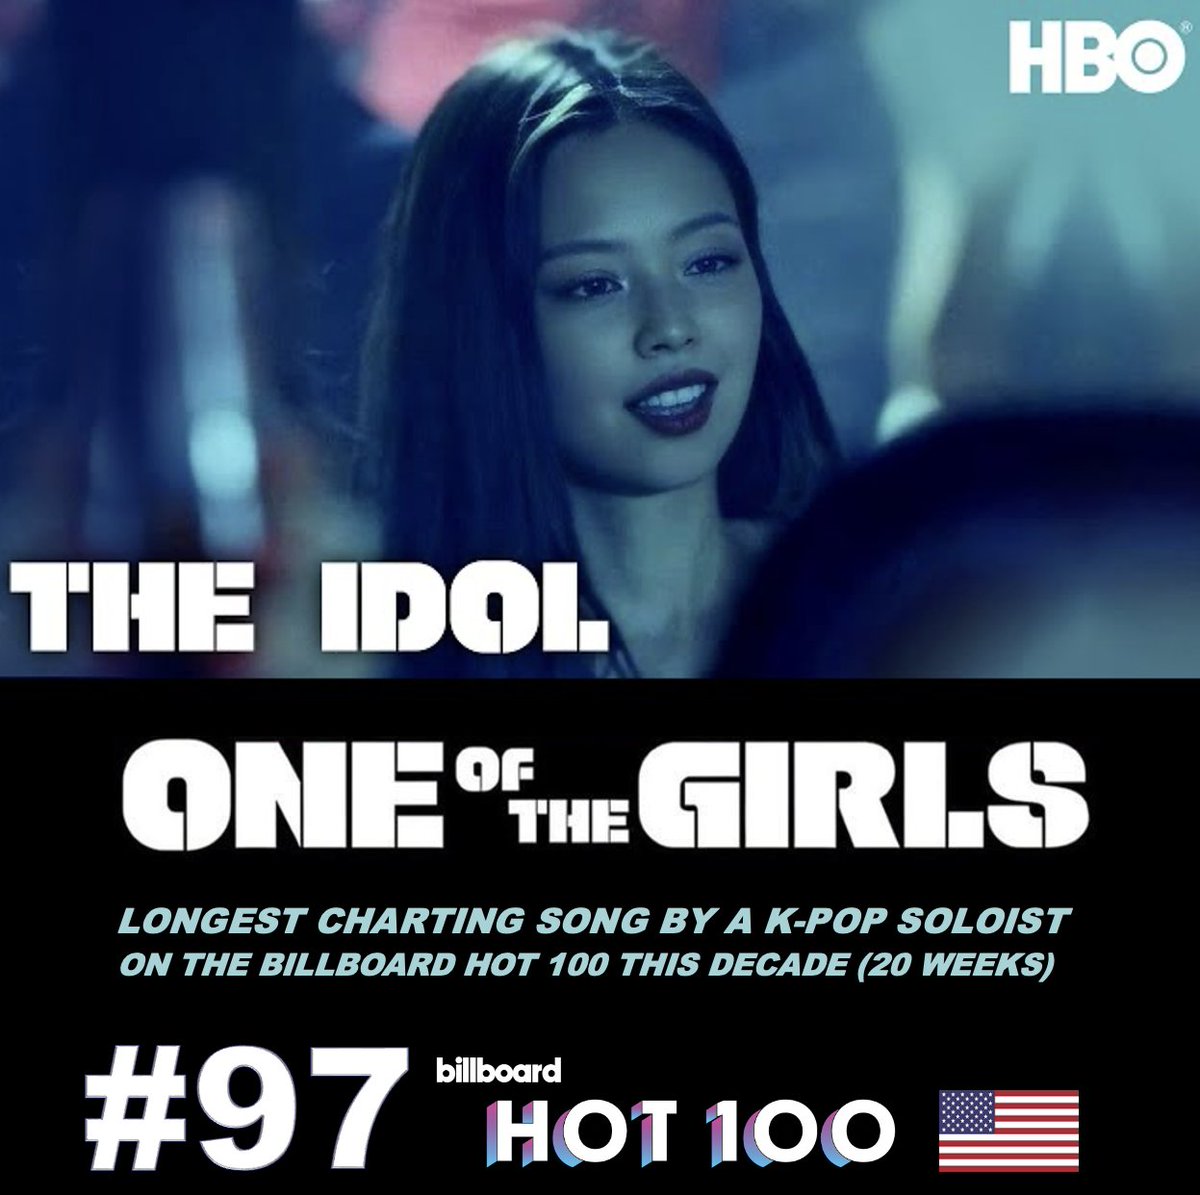 #BLACKPINK's #Jennie earns the longest charting song by a K-Pop soloist on the Billboard Hot 100 this decade (20 weeks) with One Of The Girls!💪🔝📈🇰🇷👩‍🎤🎶🇺🇸🔥💯👑🤍 #OneOfTheGirls #oddatelier @oddatelier